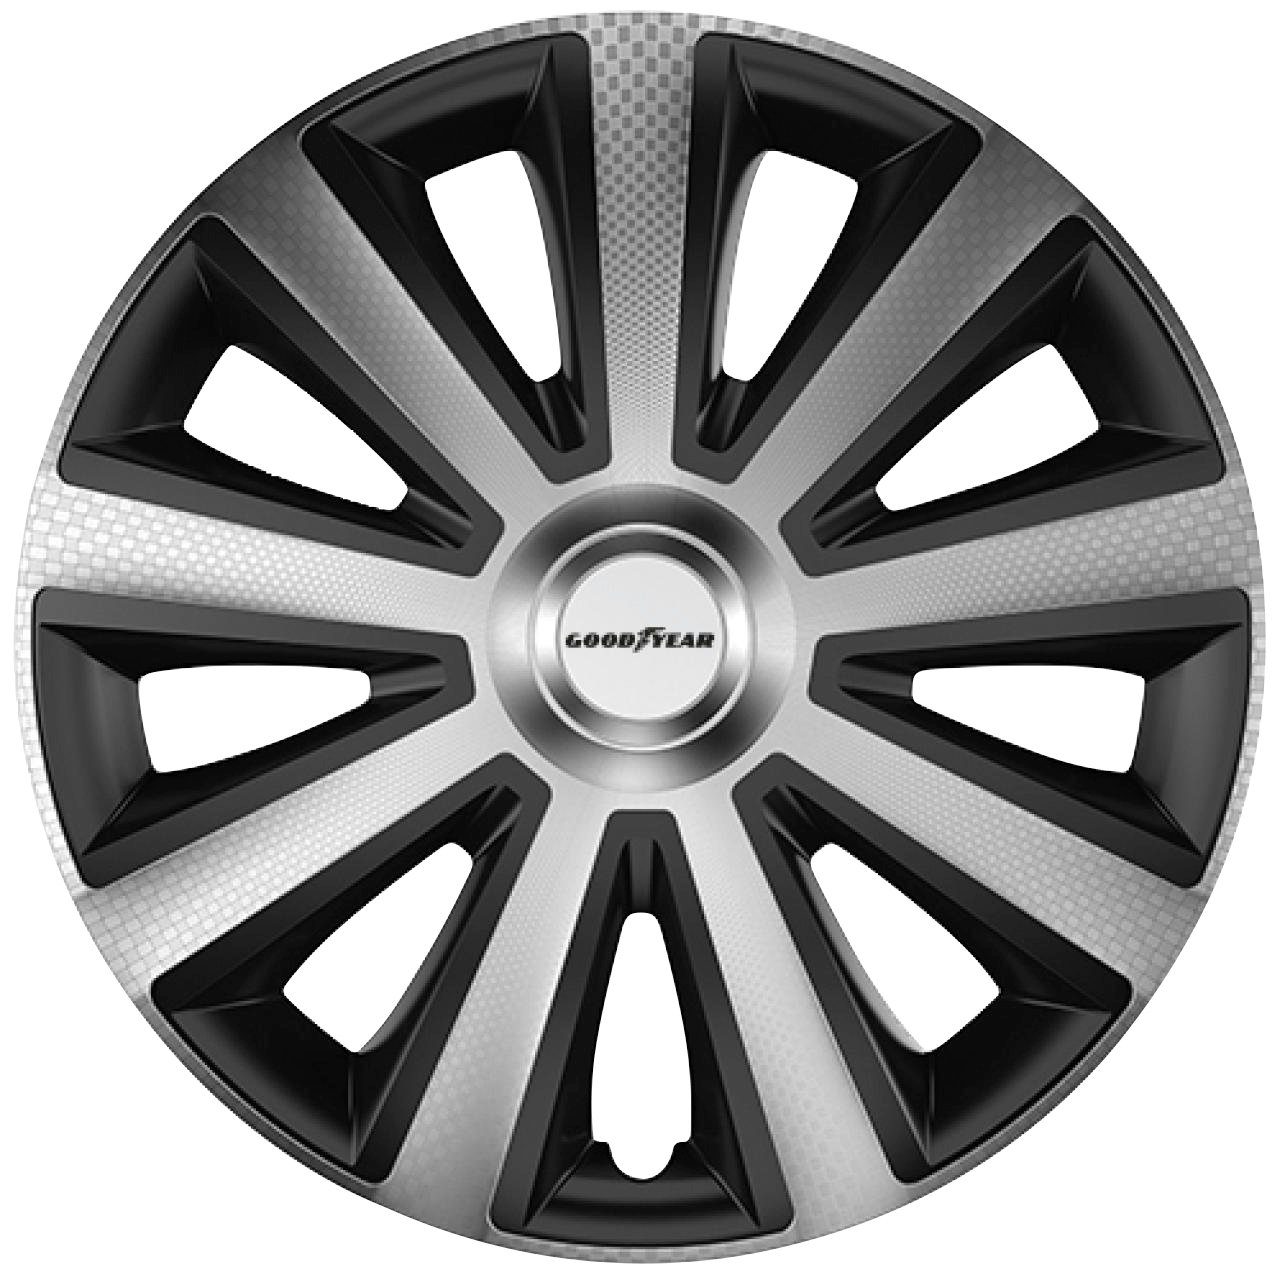 Goodyear Radkappe Carbon Memphis (Set, 14 14, Zoll, in 4-St)